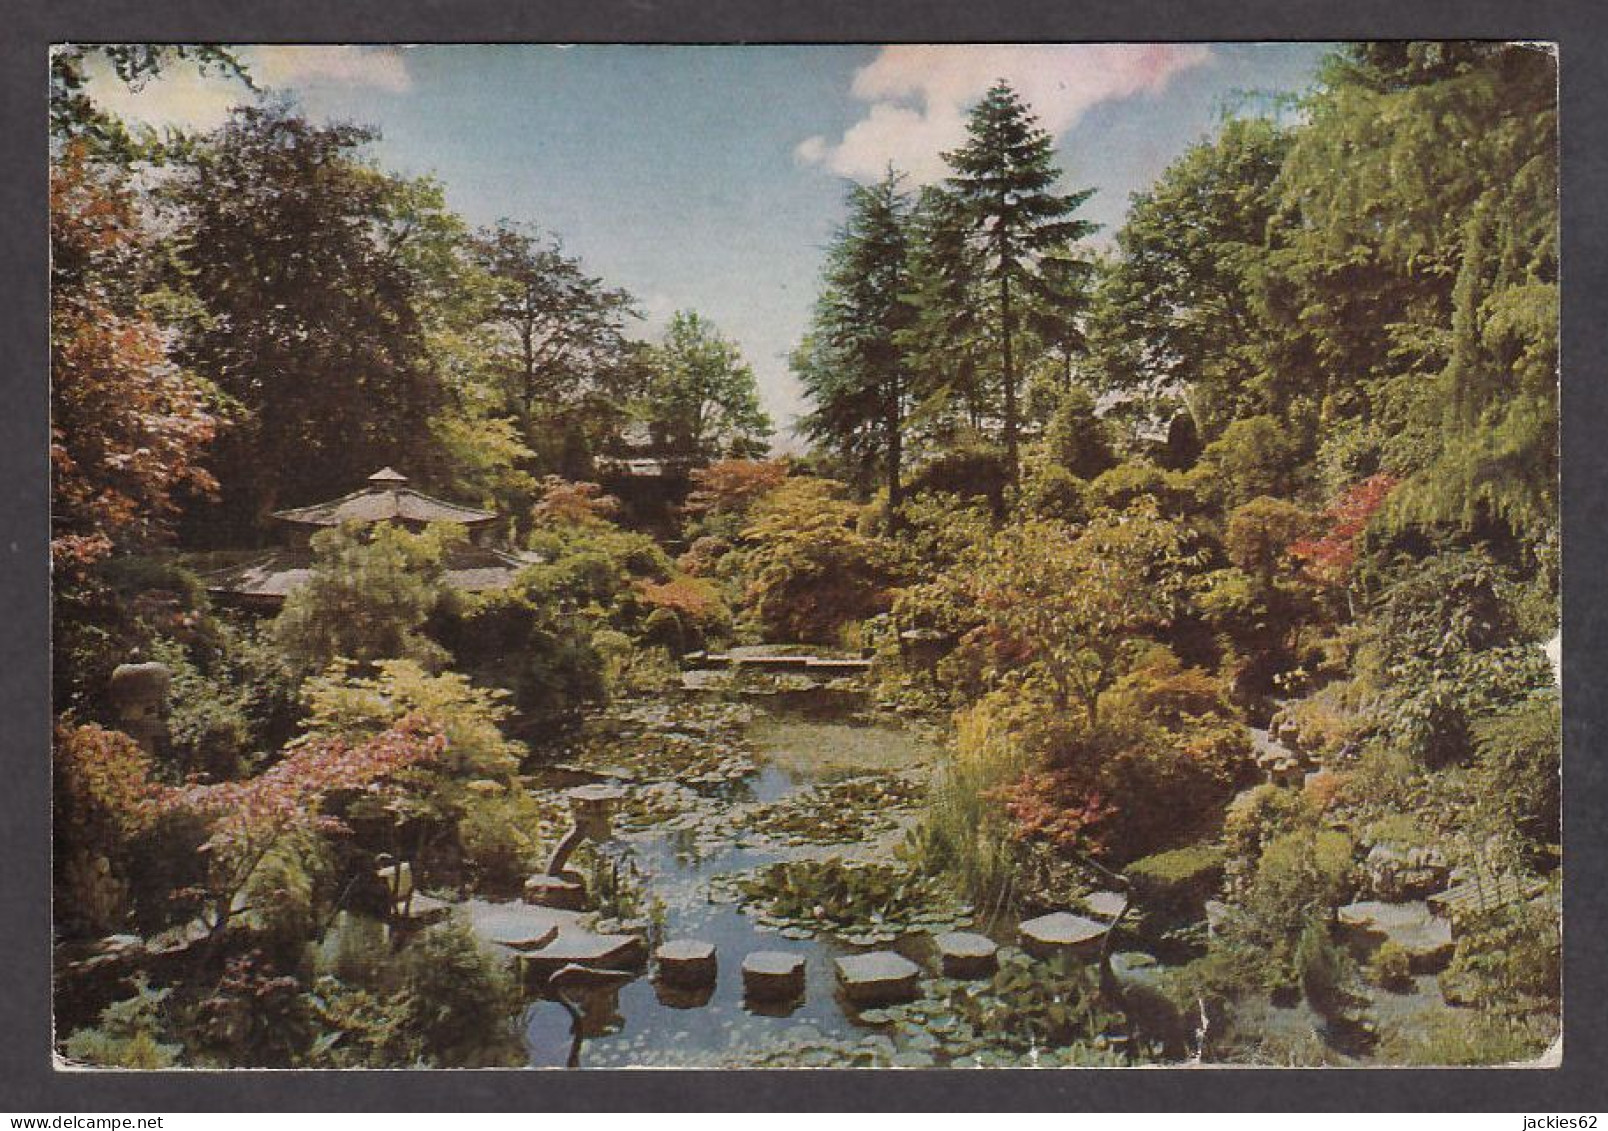 110785/ BOURNEMOUTH, Compton Acres, Japanese Garden, Stepping Stones - Bournemouth (ab 1972)